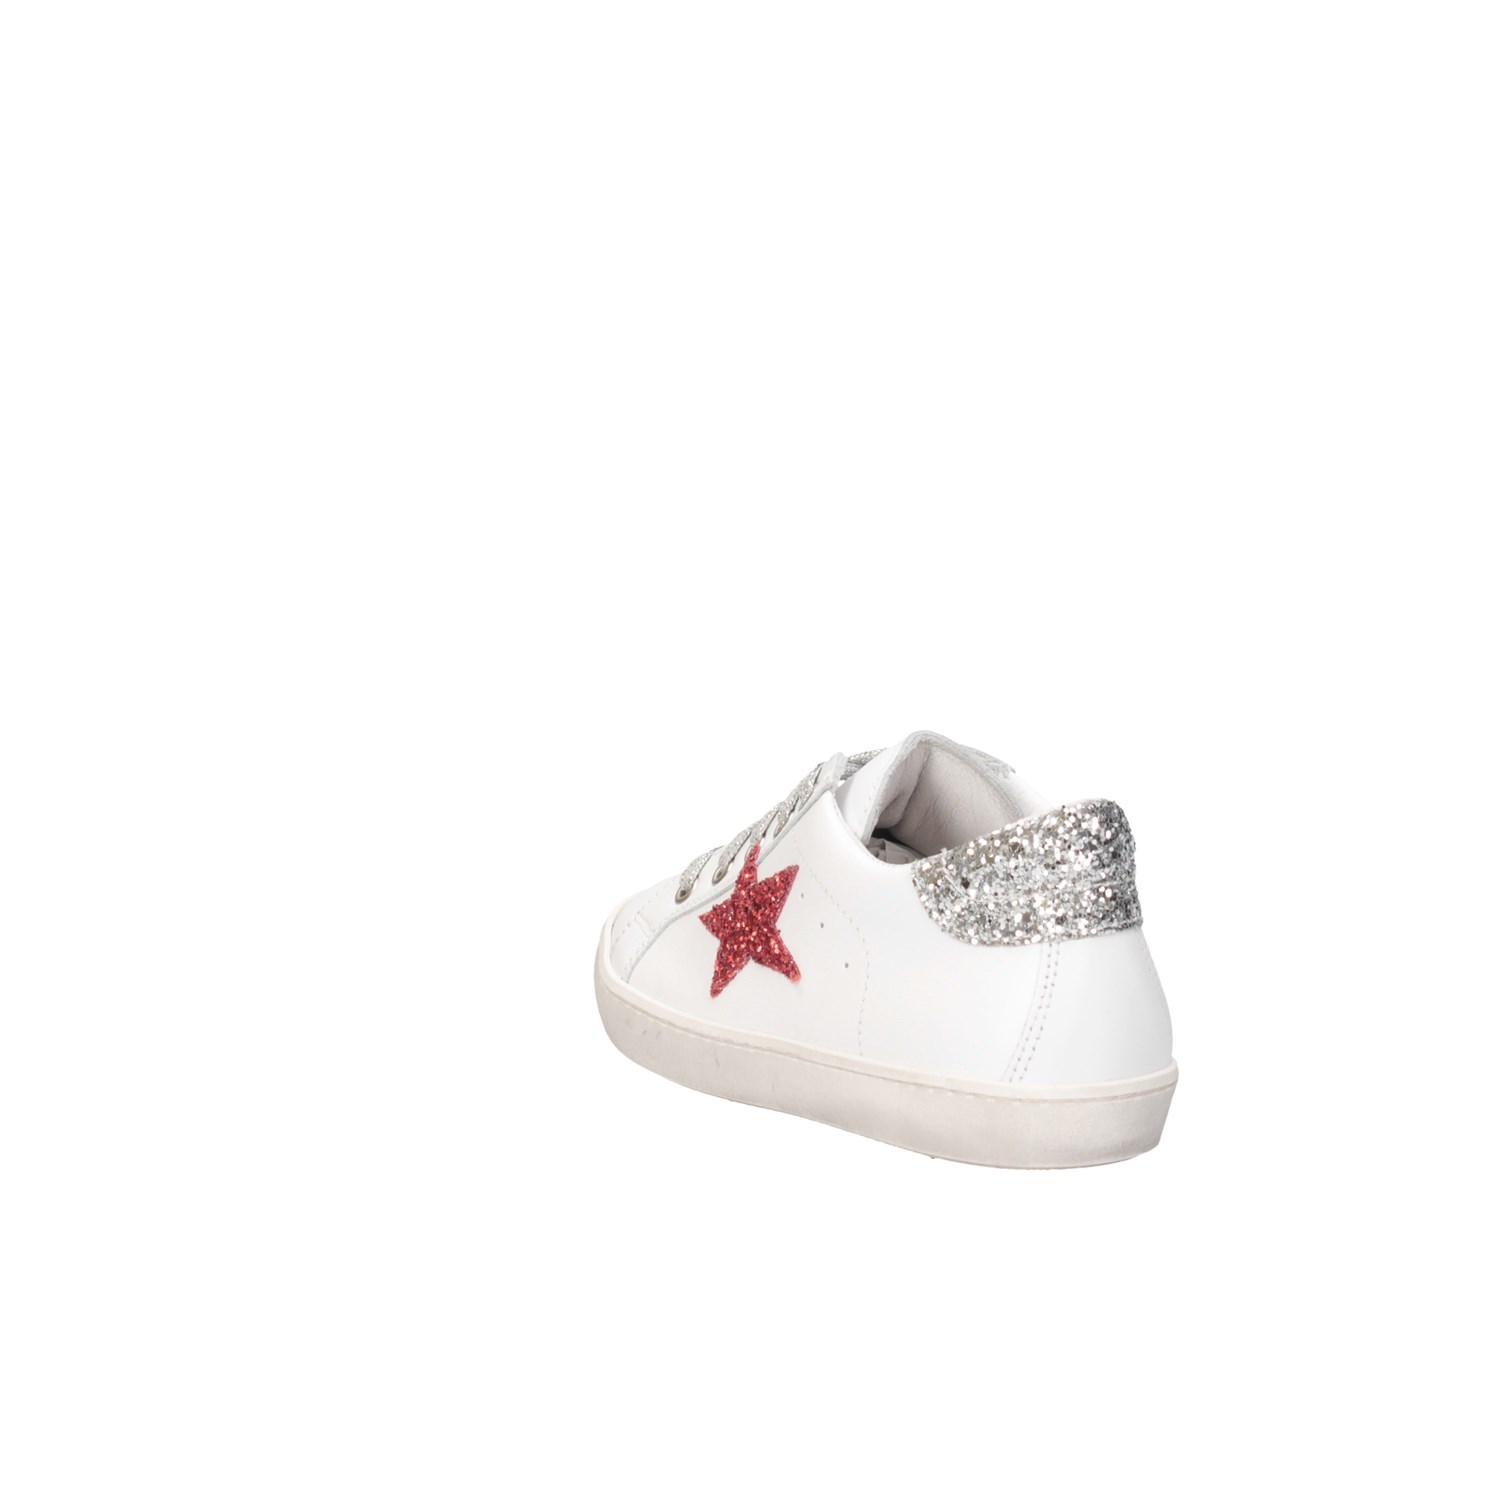 Dianetti Made In Italy I9869 White / Silver Shoes Child 